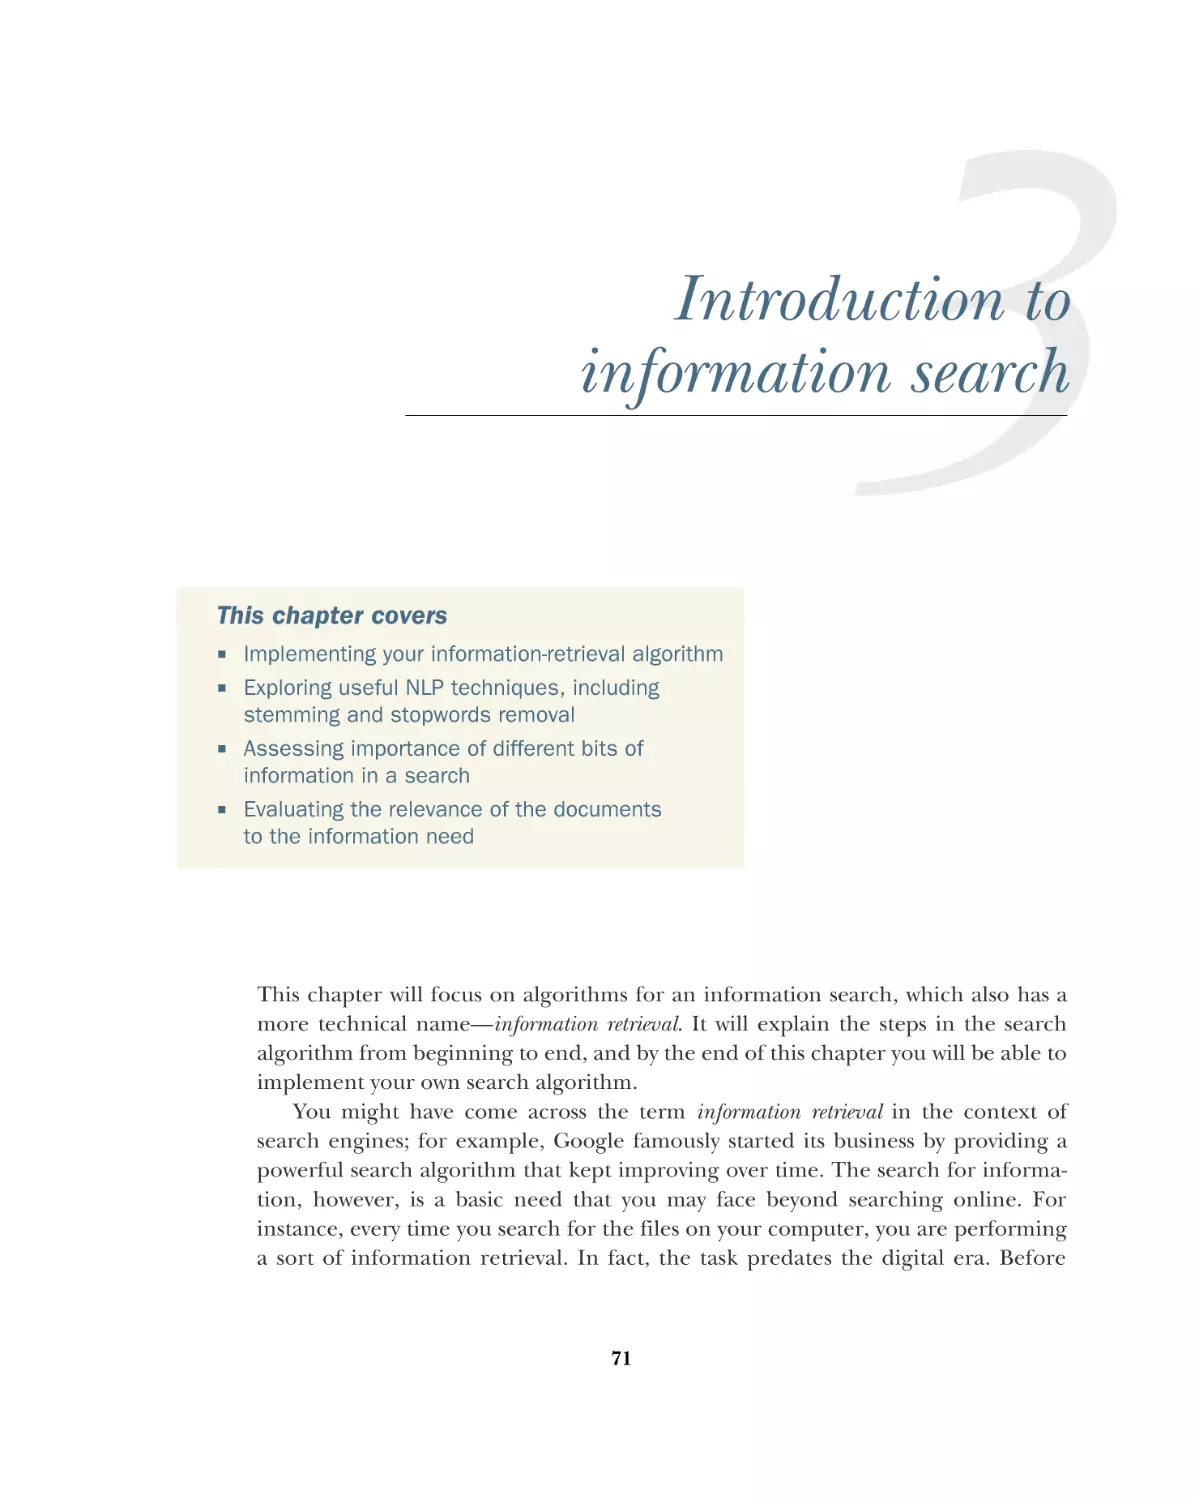 3 Introduction to information search